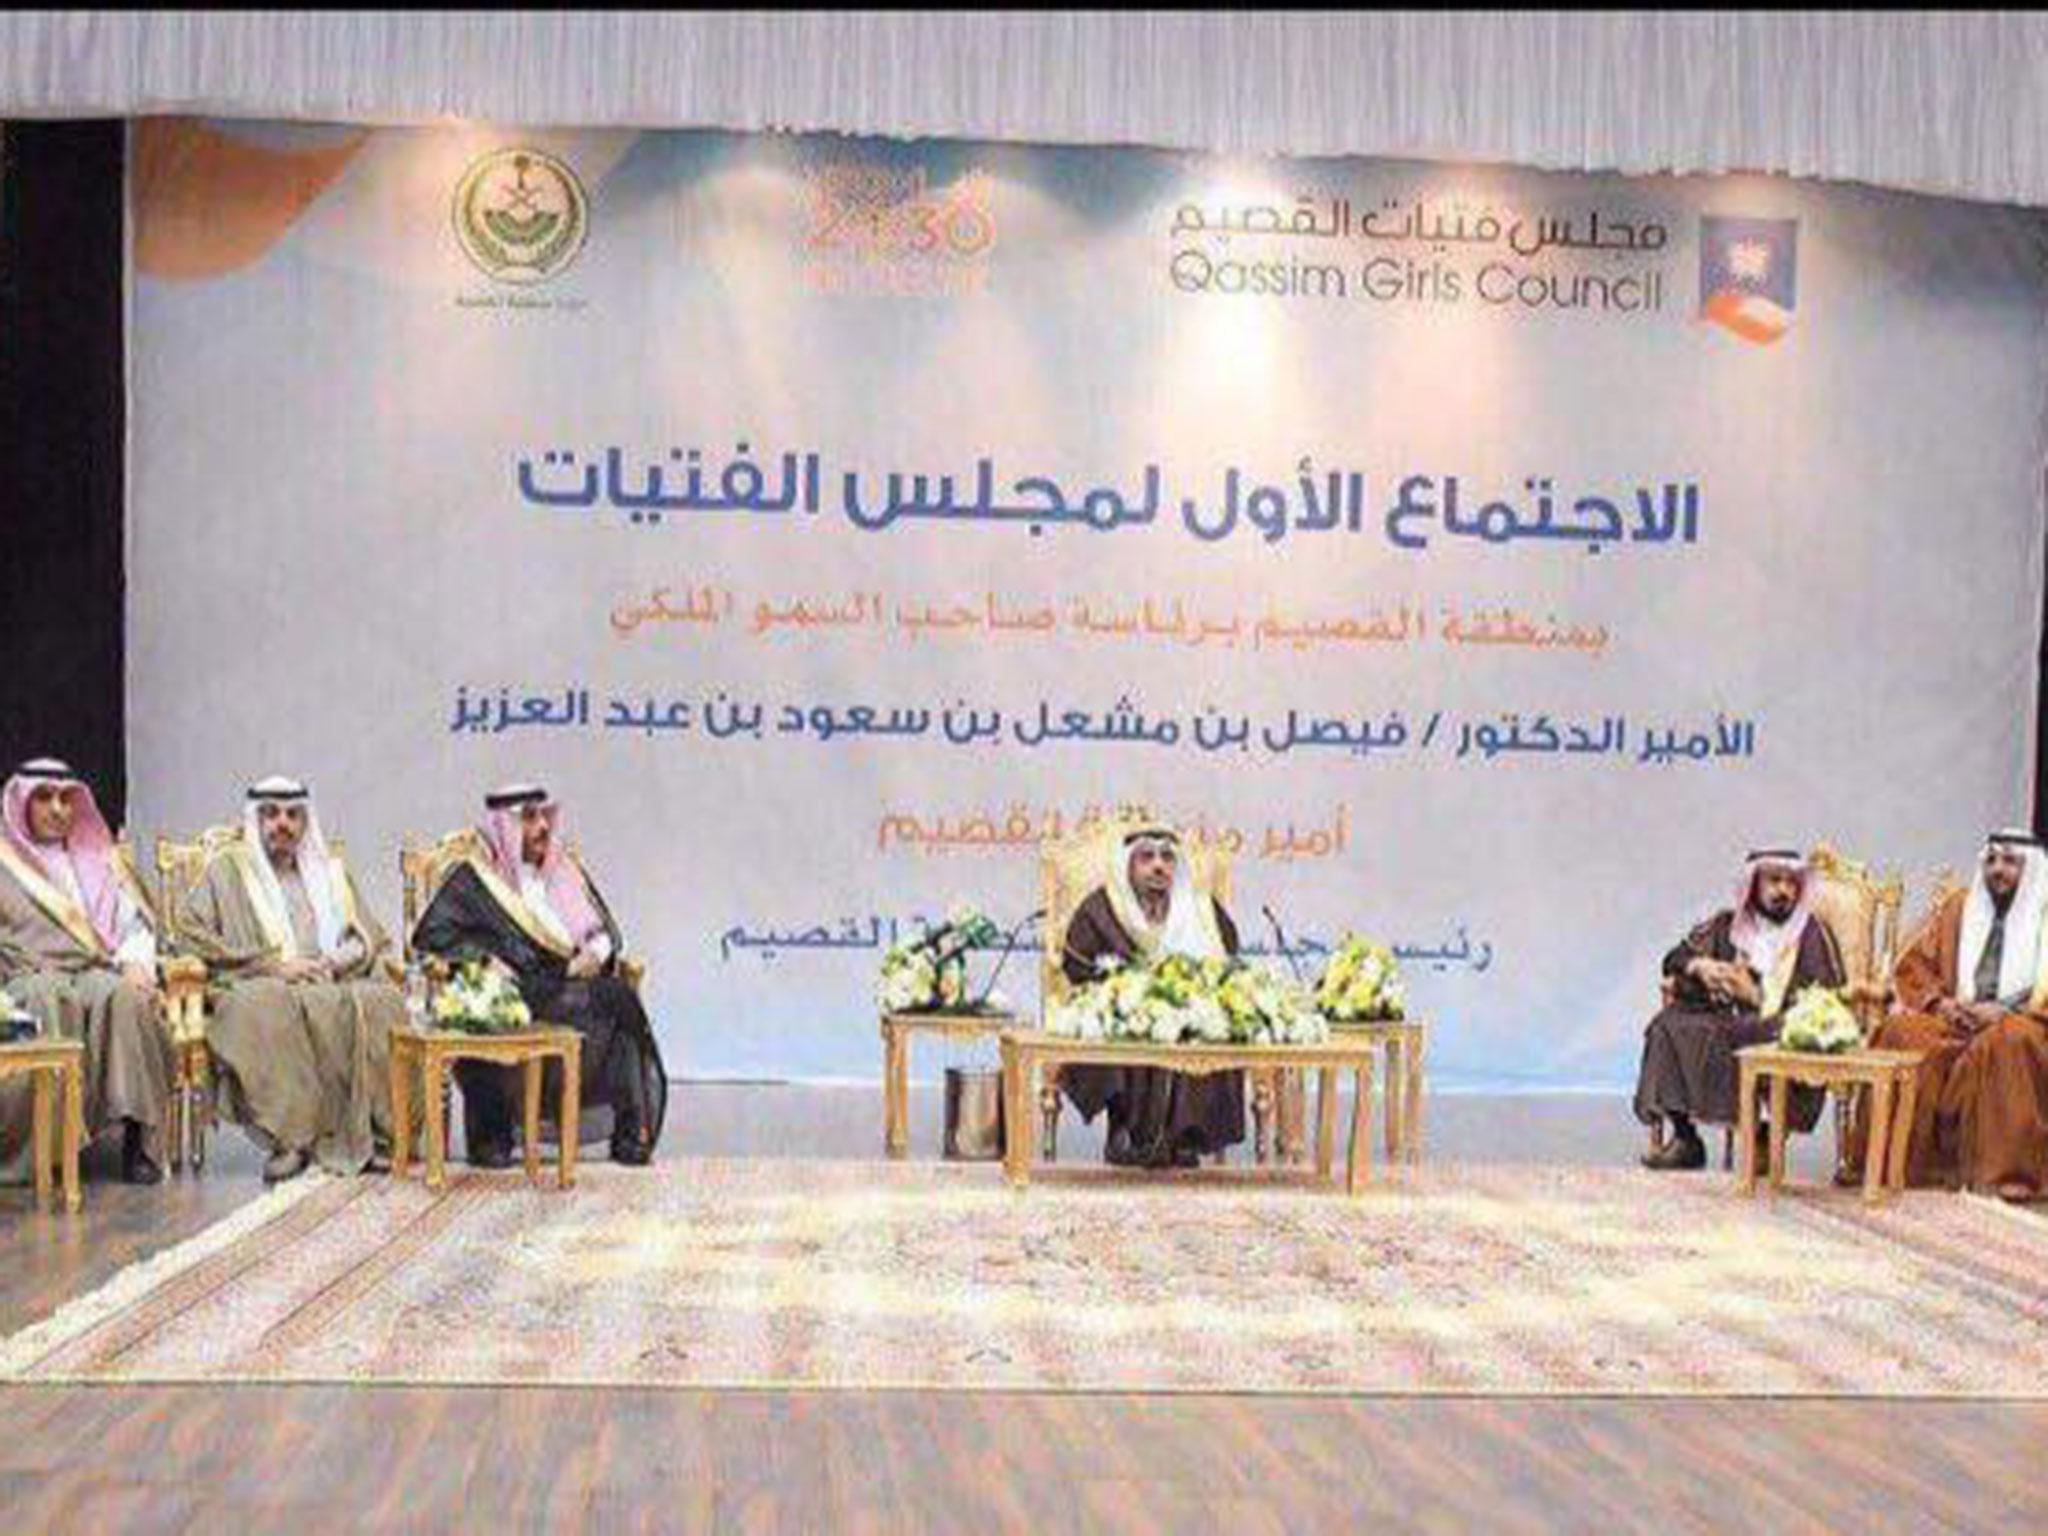 Publicity photos for the inaugural girls' council in al-Qassim showed 13 men on stage and no women